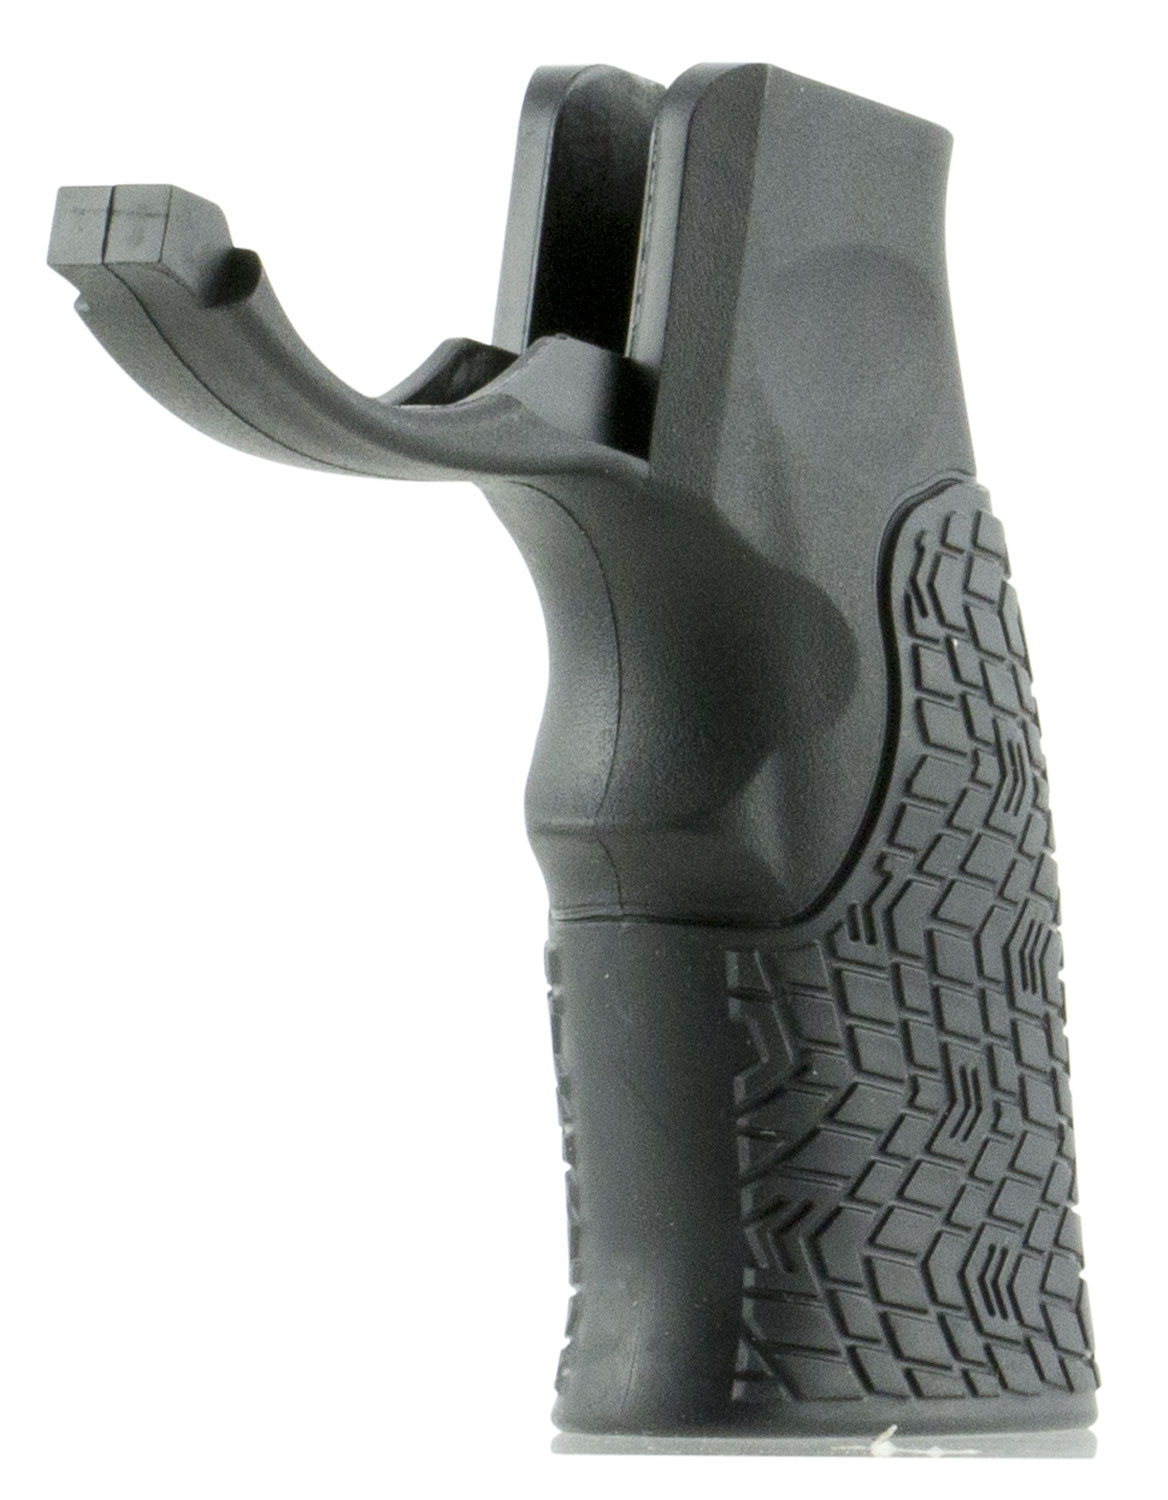 Daniel Defense 2107105177006 Pistol Grip  Made of Polymer With Black Textured Finish for AR-15